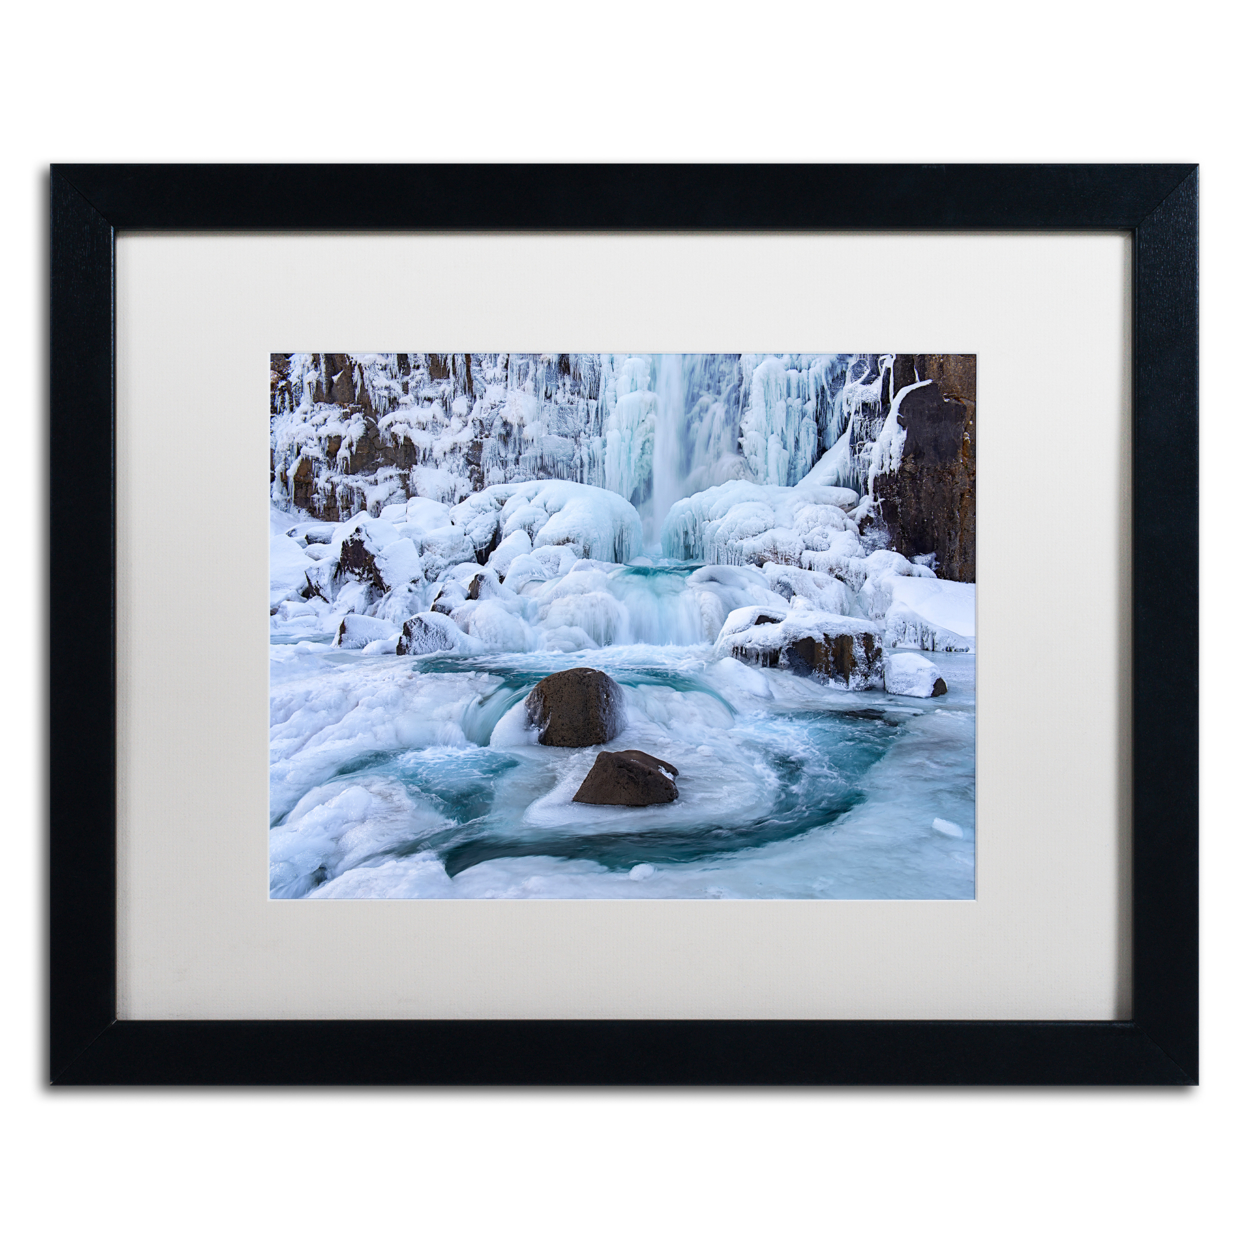 Michael Blanchette Photography 'Frosty Falls' Black Wooden Framed Art 18 X 22 Inches